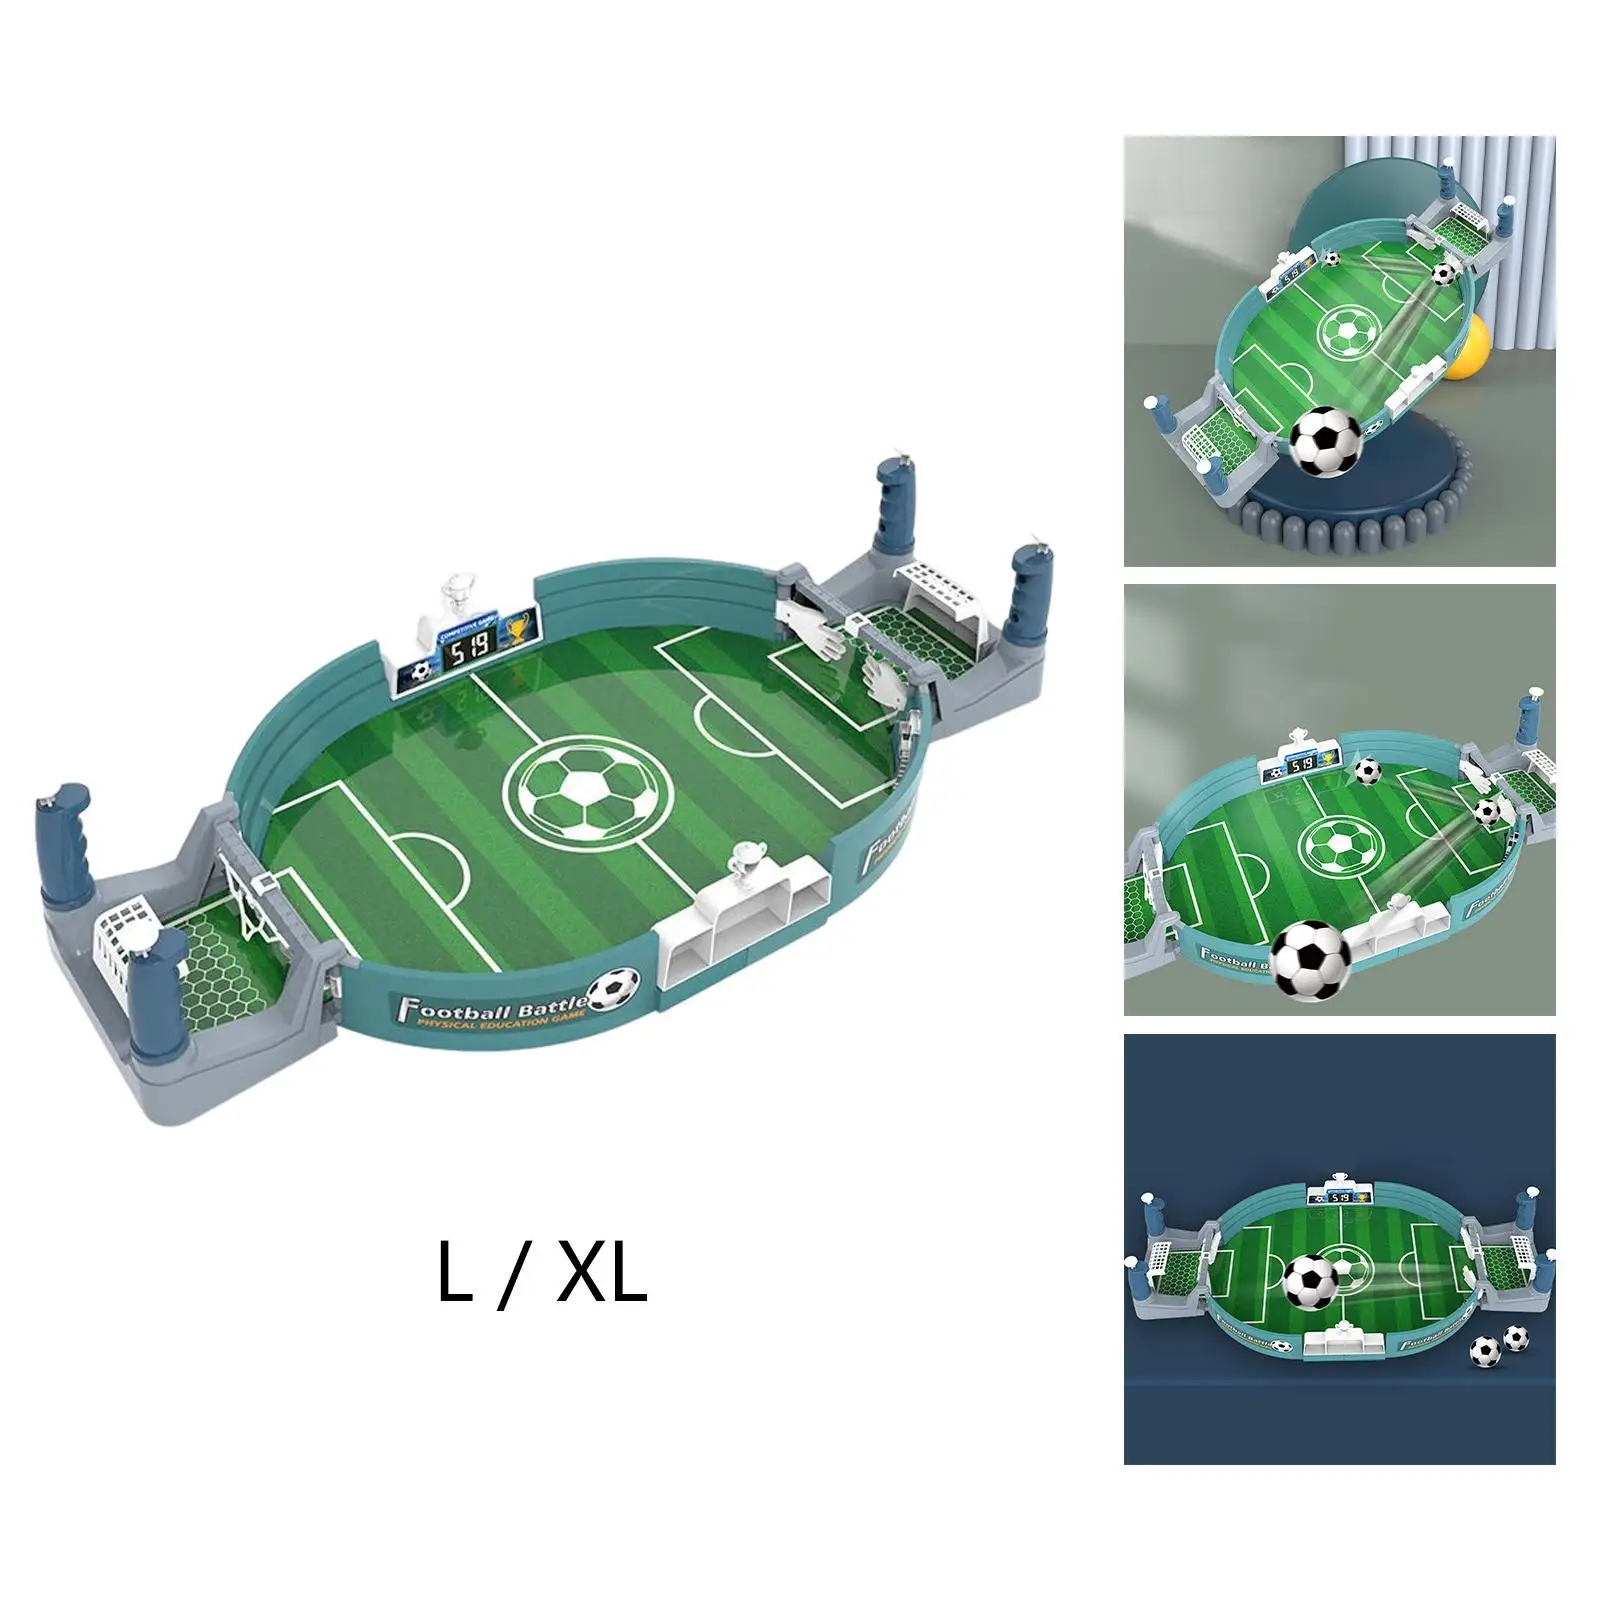 Interactive Tabletop Football Games Mini Tabletop Football Soccer Pinball Games Funny Football Game for Family Girls Boys